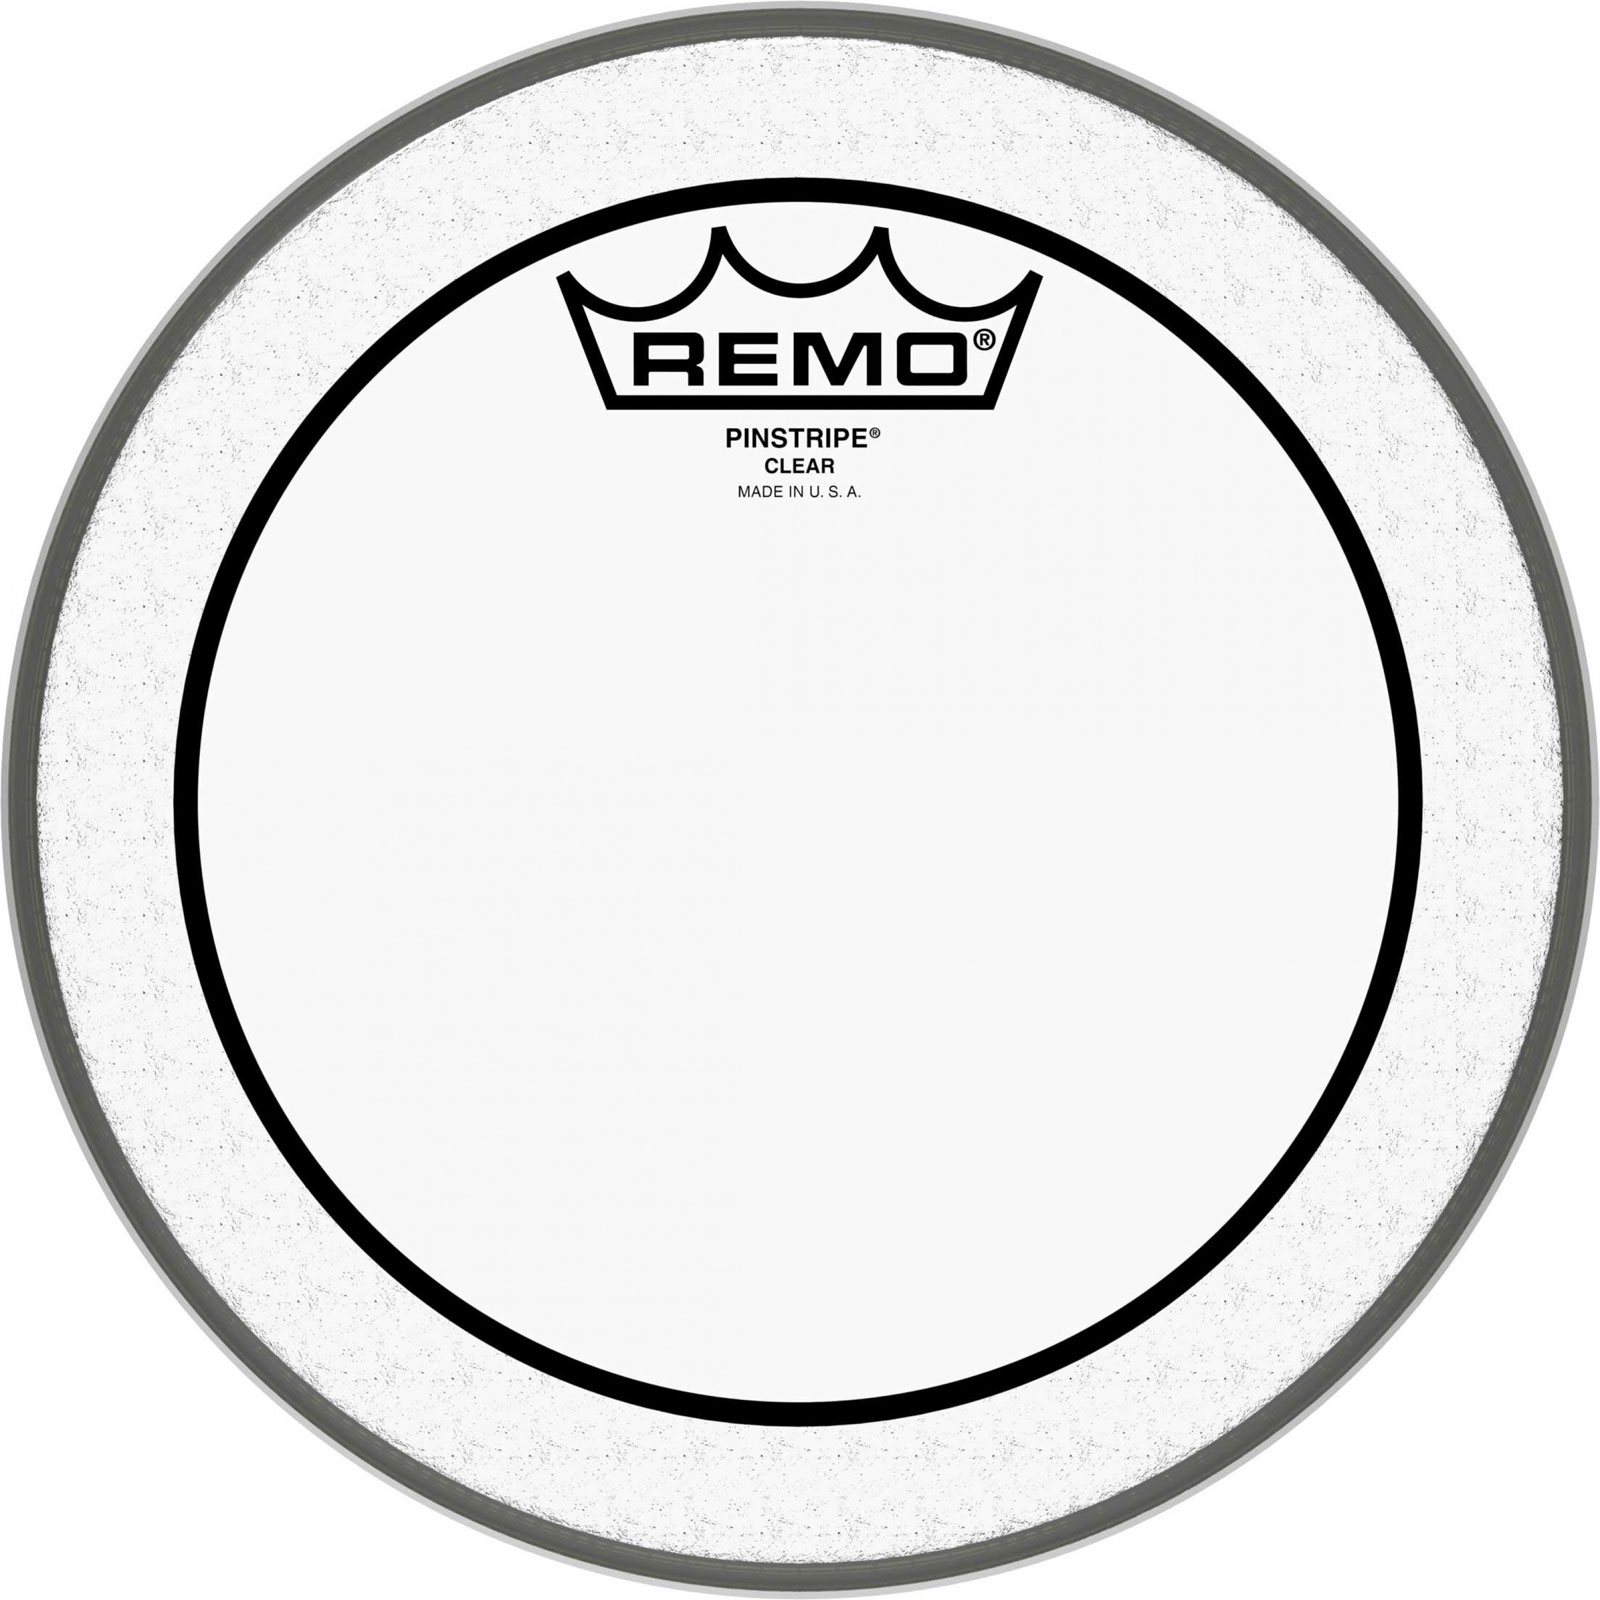 REMO PS-0308-00 - PINSTRIPE CLEAR 8